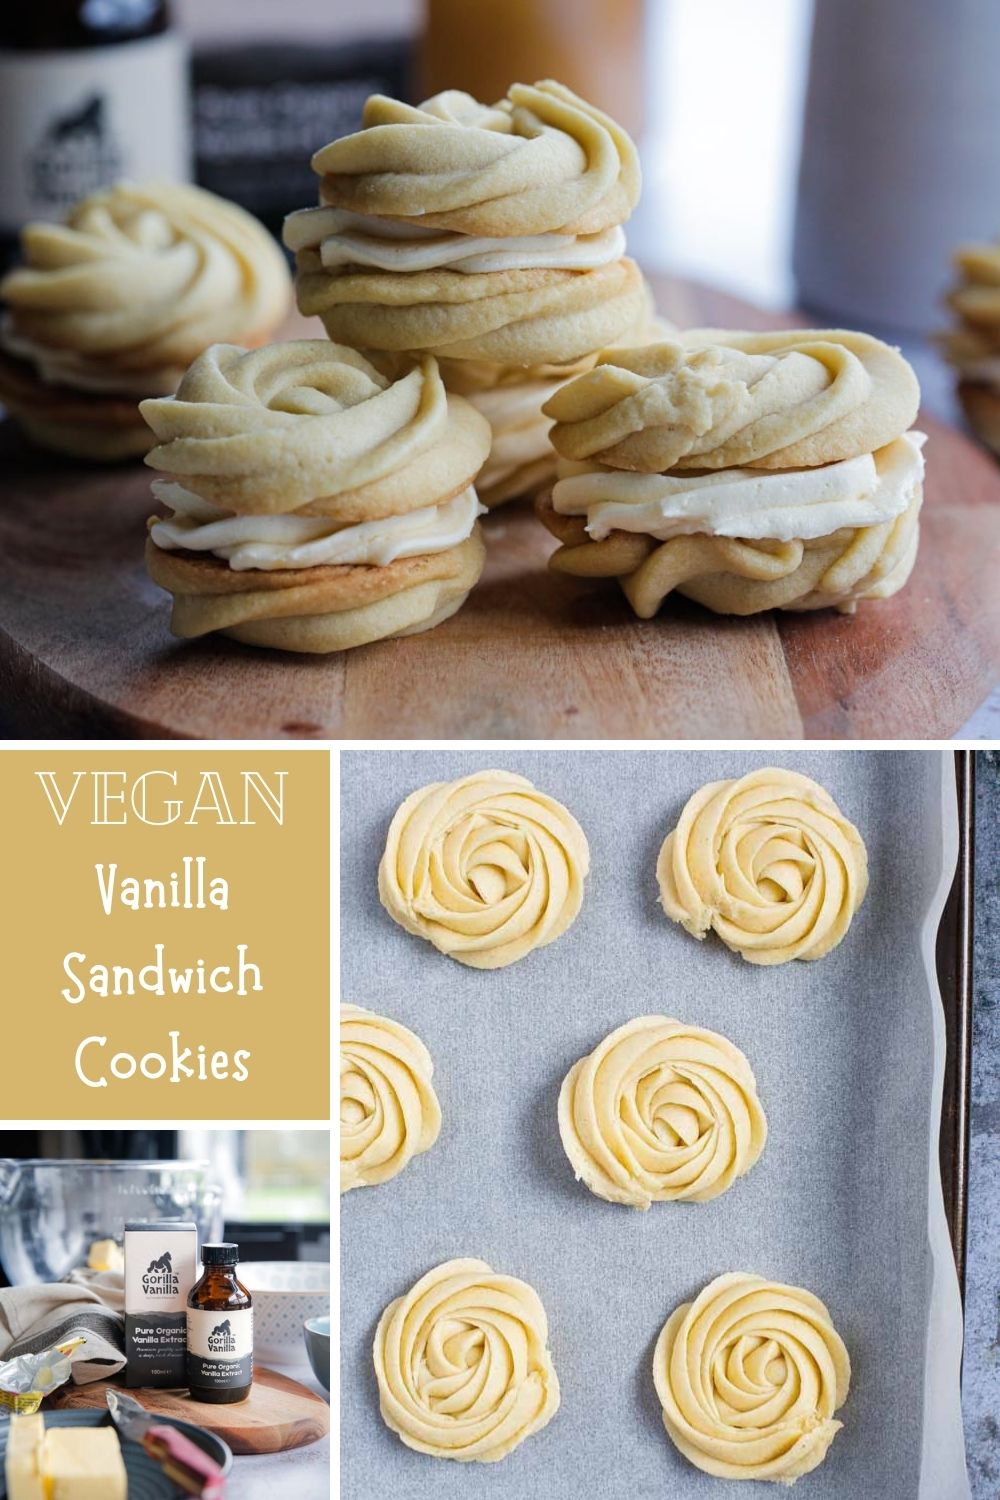 Soft, buttery and melt in the mouth these vegan vanilla sandwich cookies filled with vanilla buttercream are an easy to bake delicate little treat! Recipe on thecookandhim.com #vegancookies #veganbaking #vanillacookies #sandwichcookies #vanilla #veganrecipes